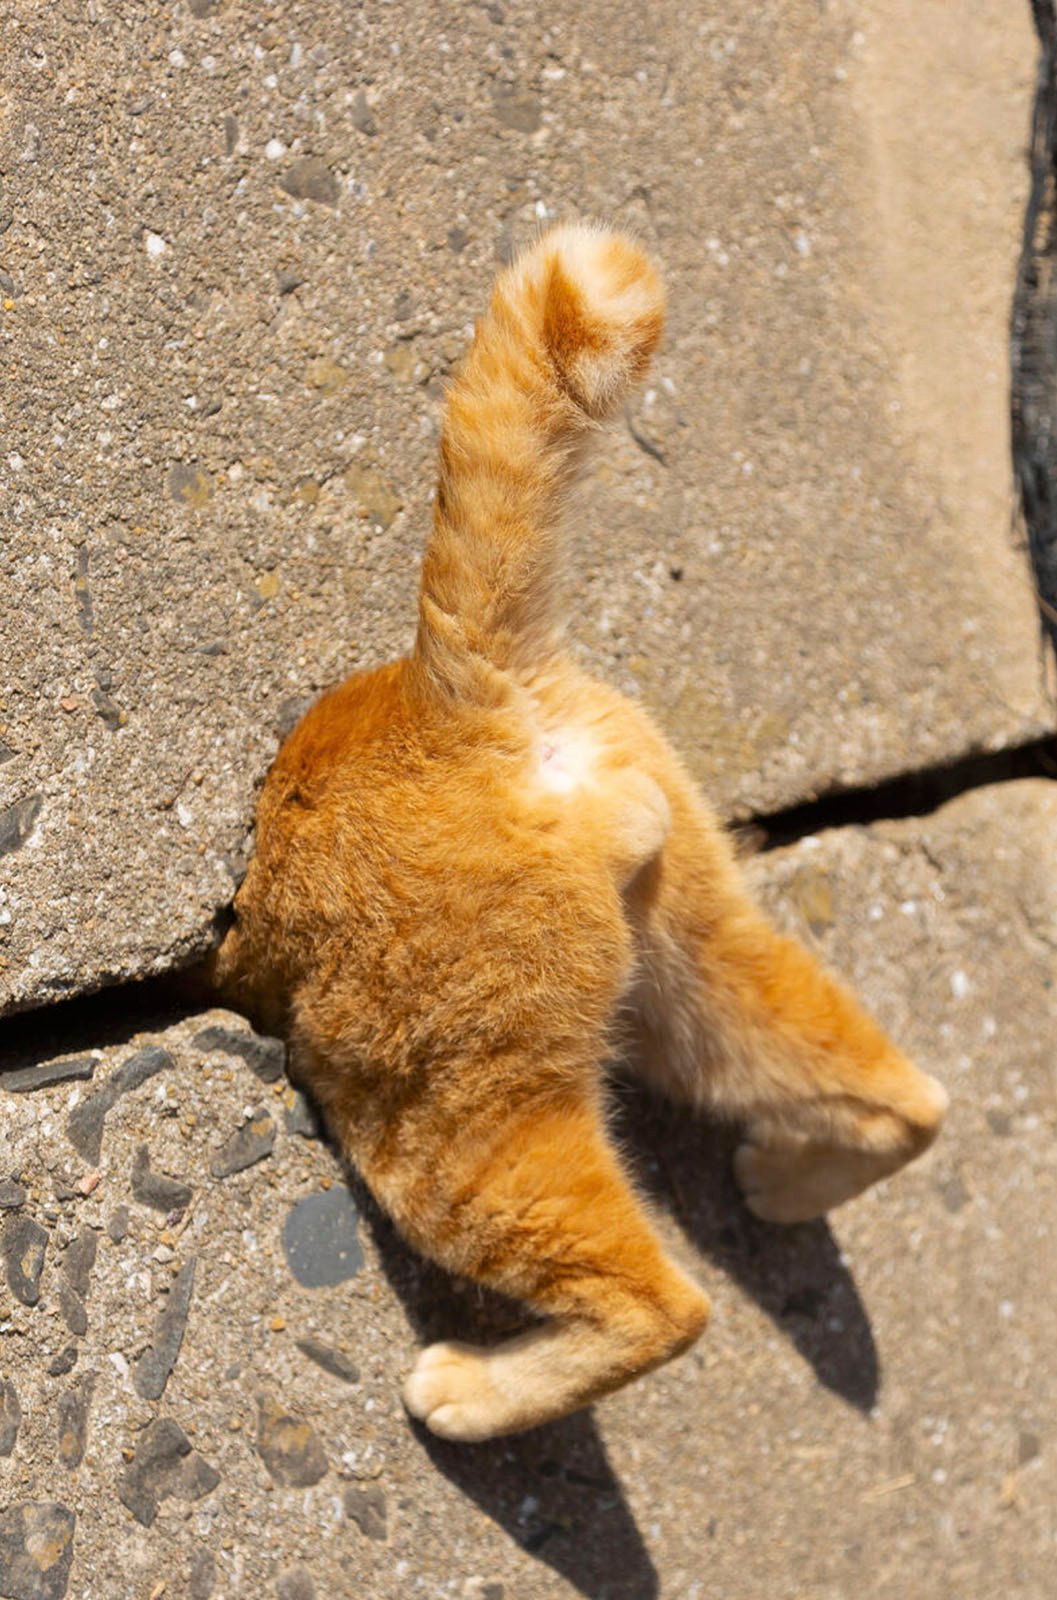 A ginger cat's tail sticking out as it squeezes under a concrete slab, with its body mostly hidden from view.